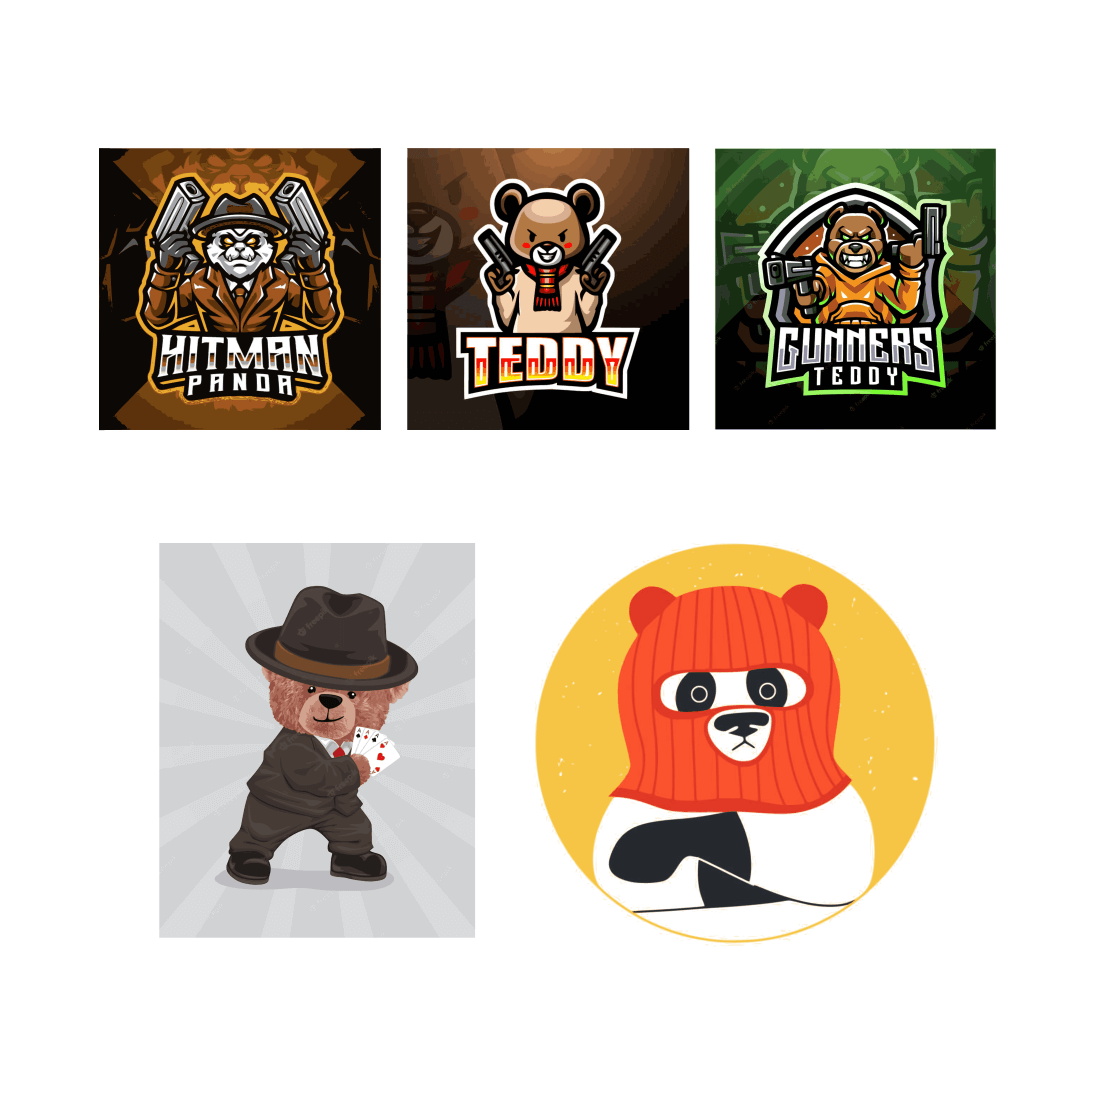 Group of logos with a bear wearing a hat.